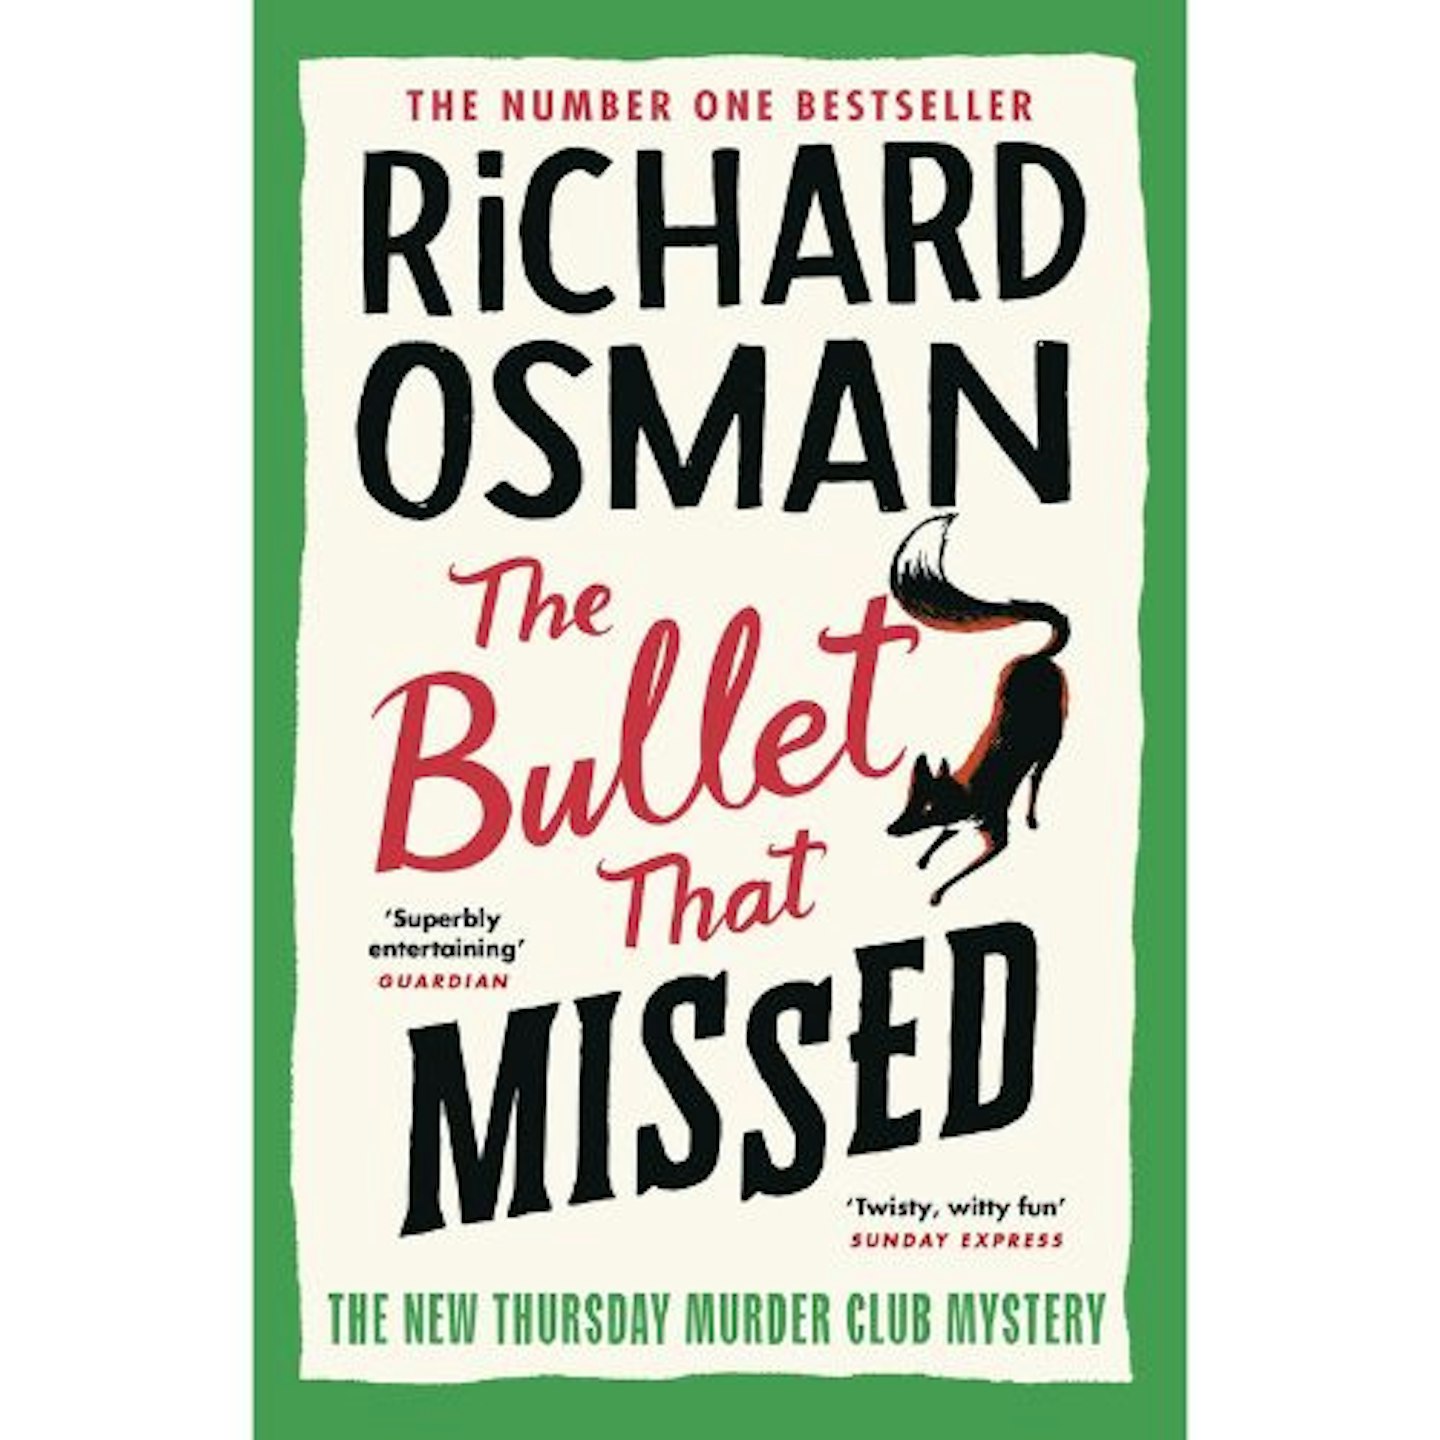 The Bullet That Missed by Richard Osman